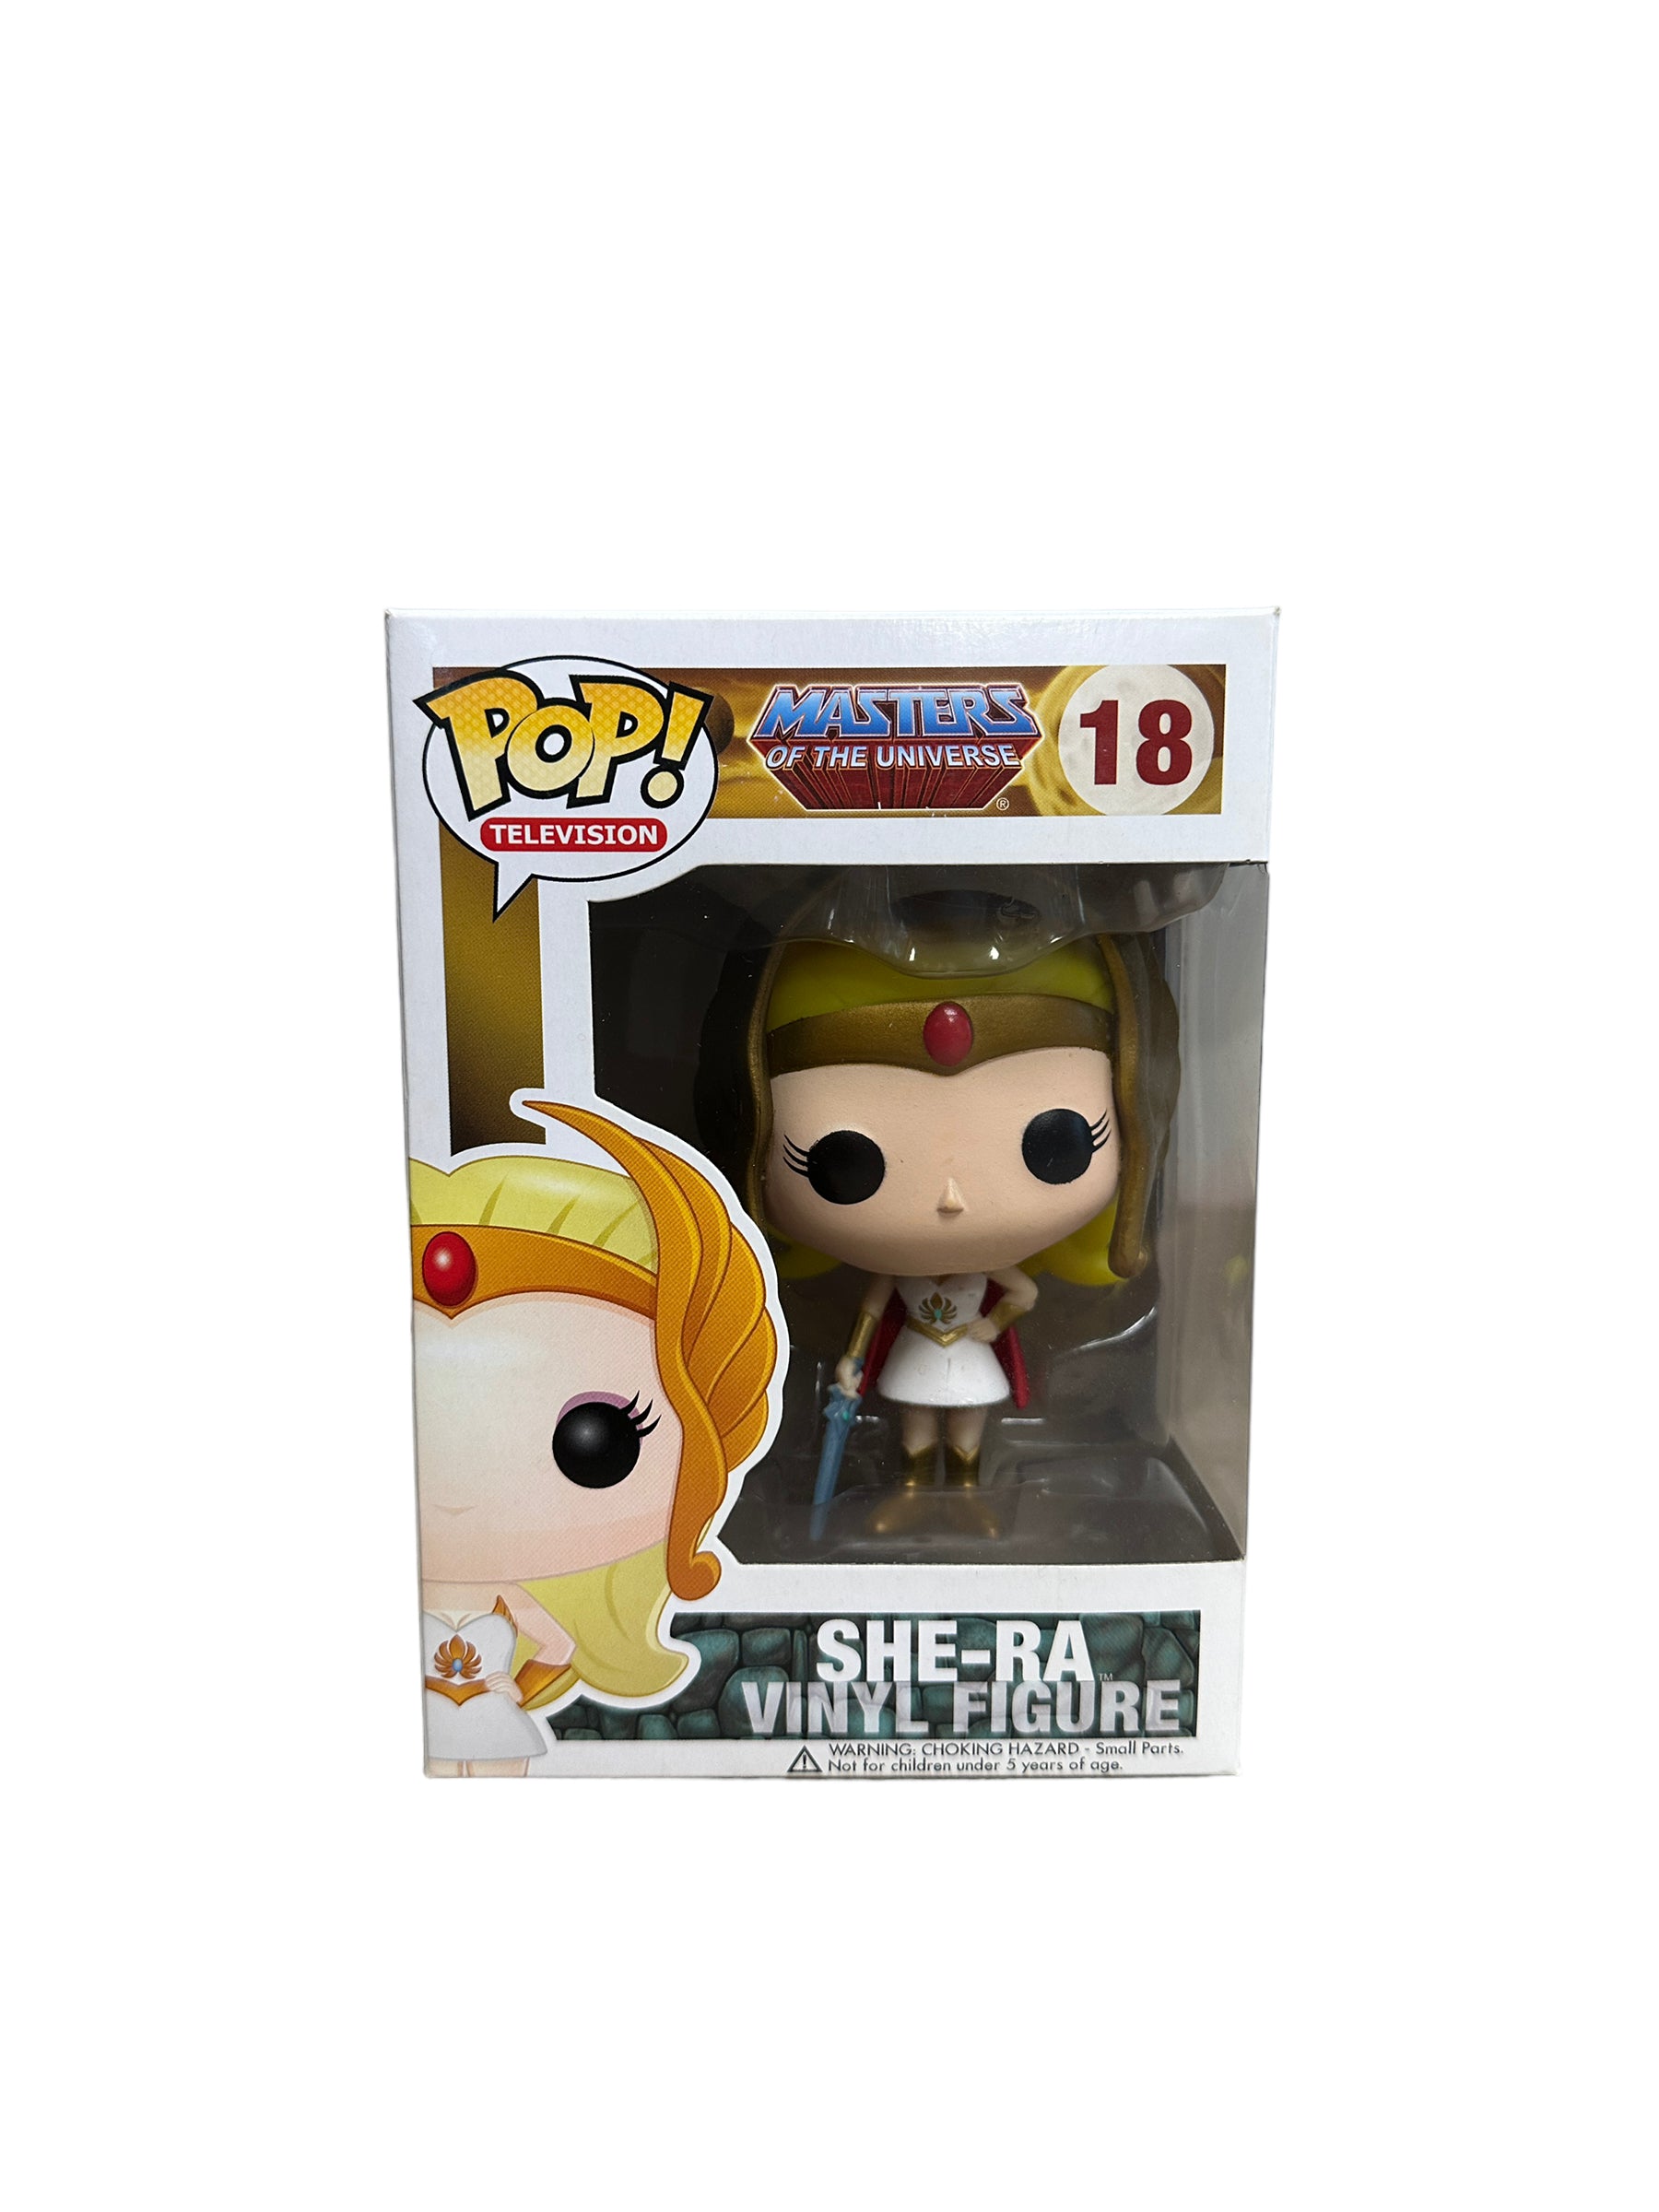 She-Ra #18 Funko Pop! - Masters of the Universe - 2013 Pop! - Condition 8.5/10